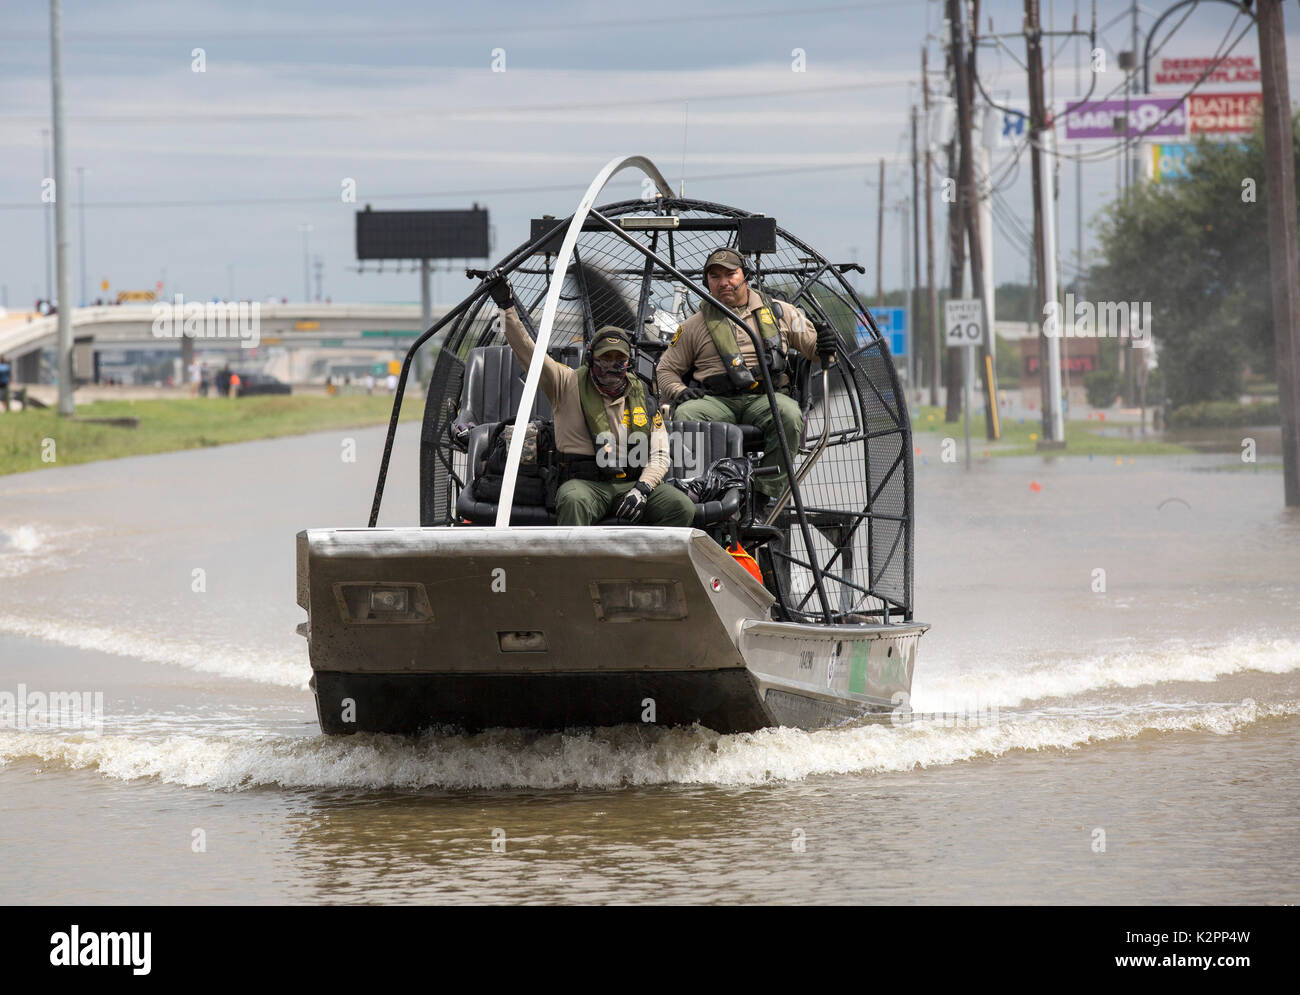 Houston, United States. 30th Aug, 2017. U.S Border Patrol riverine agents on an air boat patrol a neighborhood flooded by rising waters to assist in evacuating resident in the aftermath of Hurricane Harvey August 30, 2017 in Houston, Texas. Credit: Planetpix/Alamy Live News Stock Photo